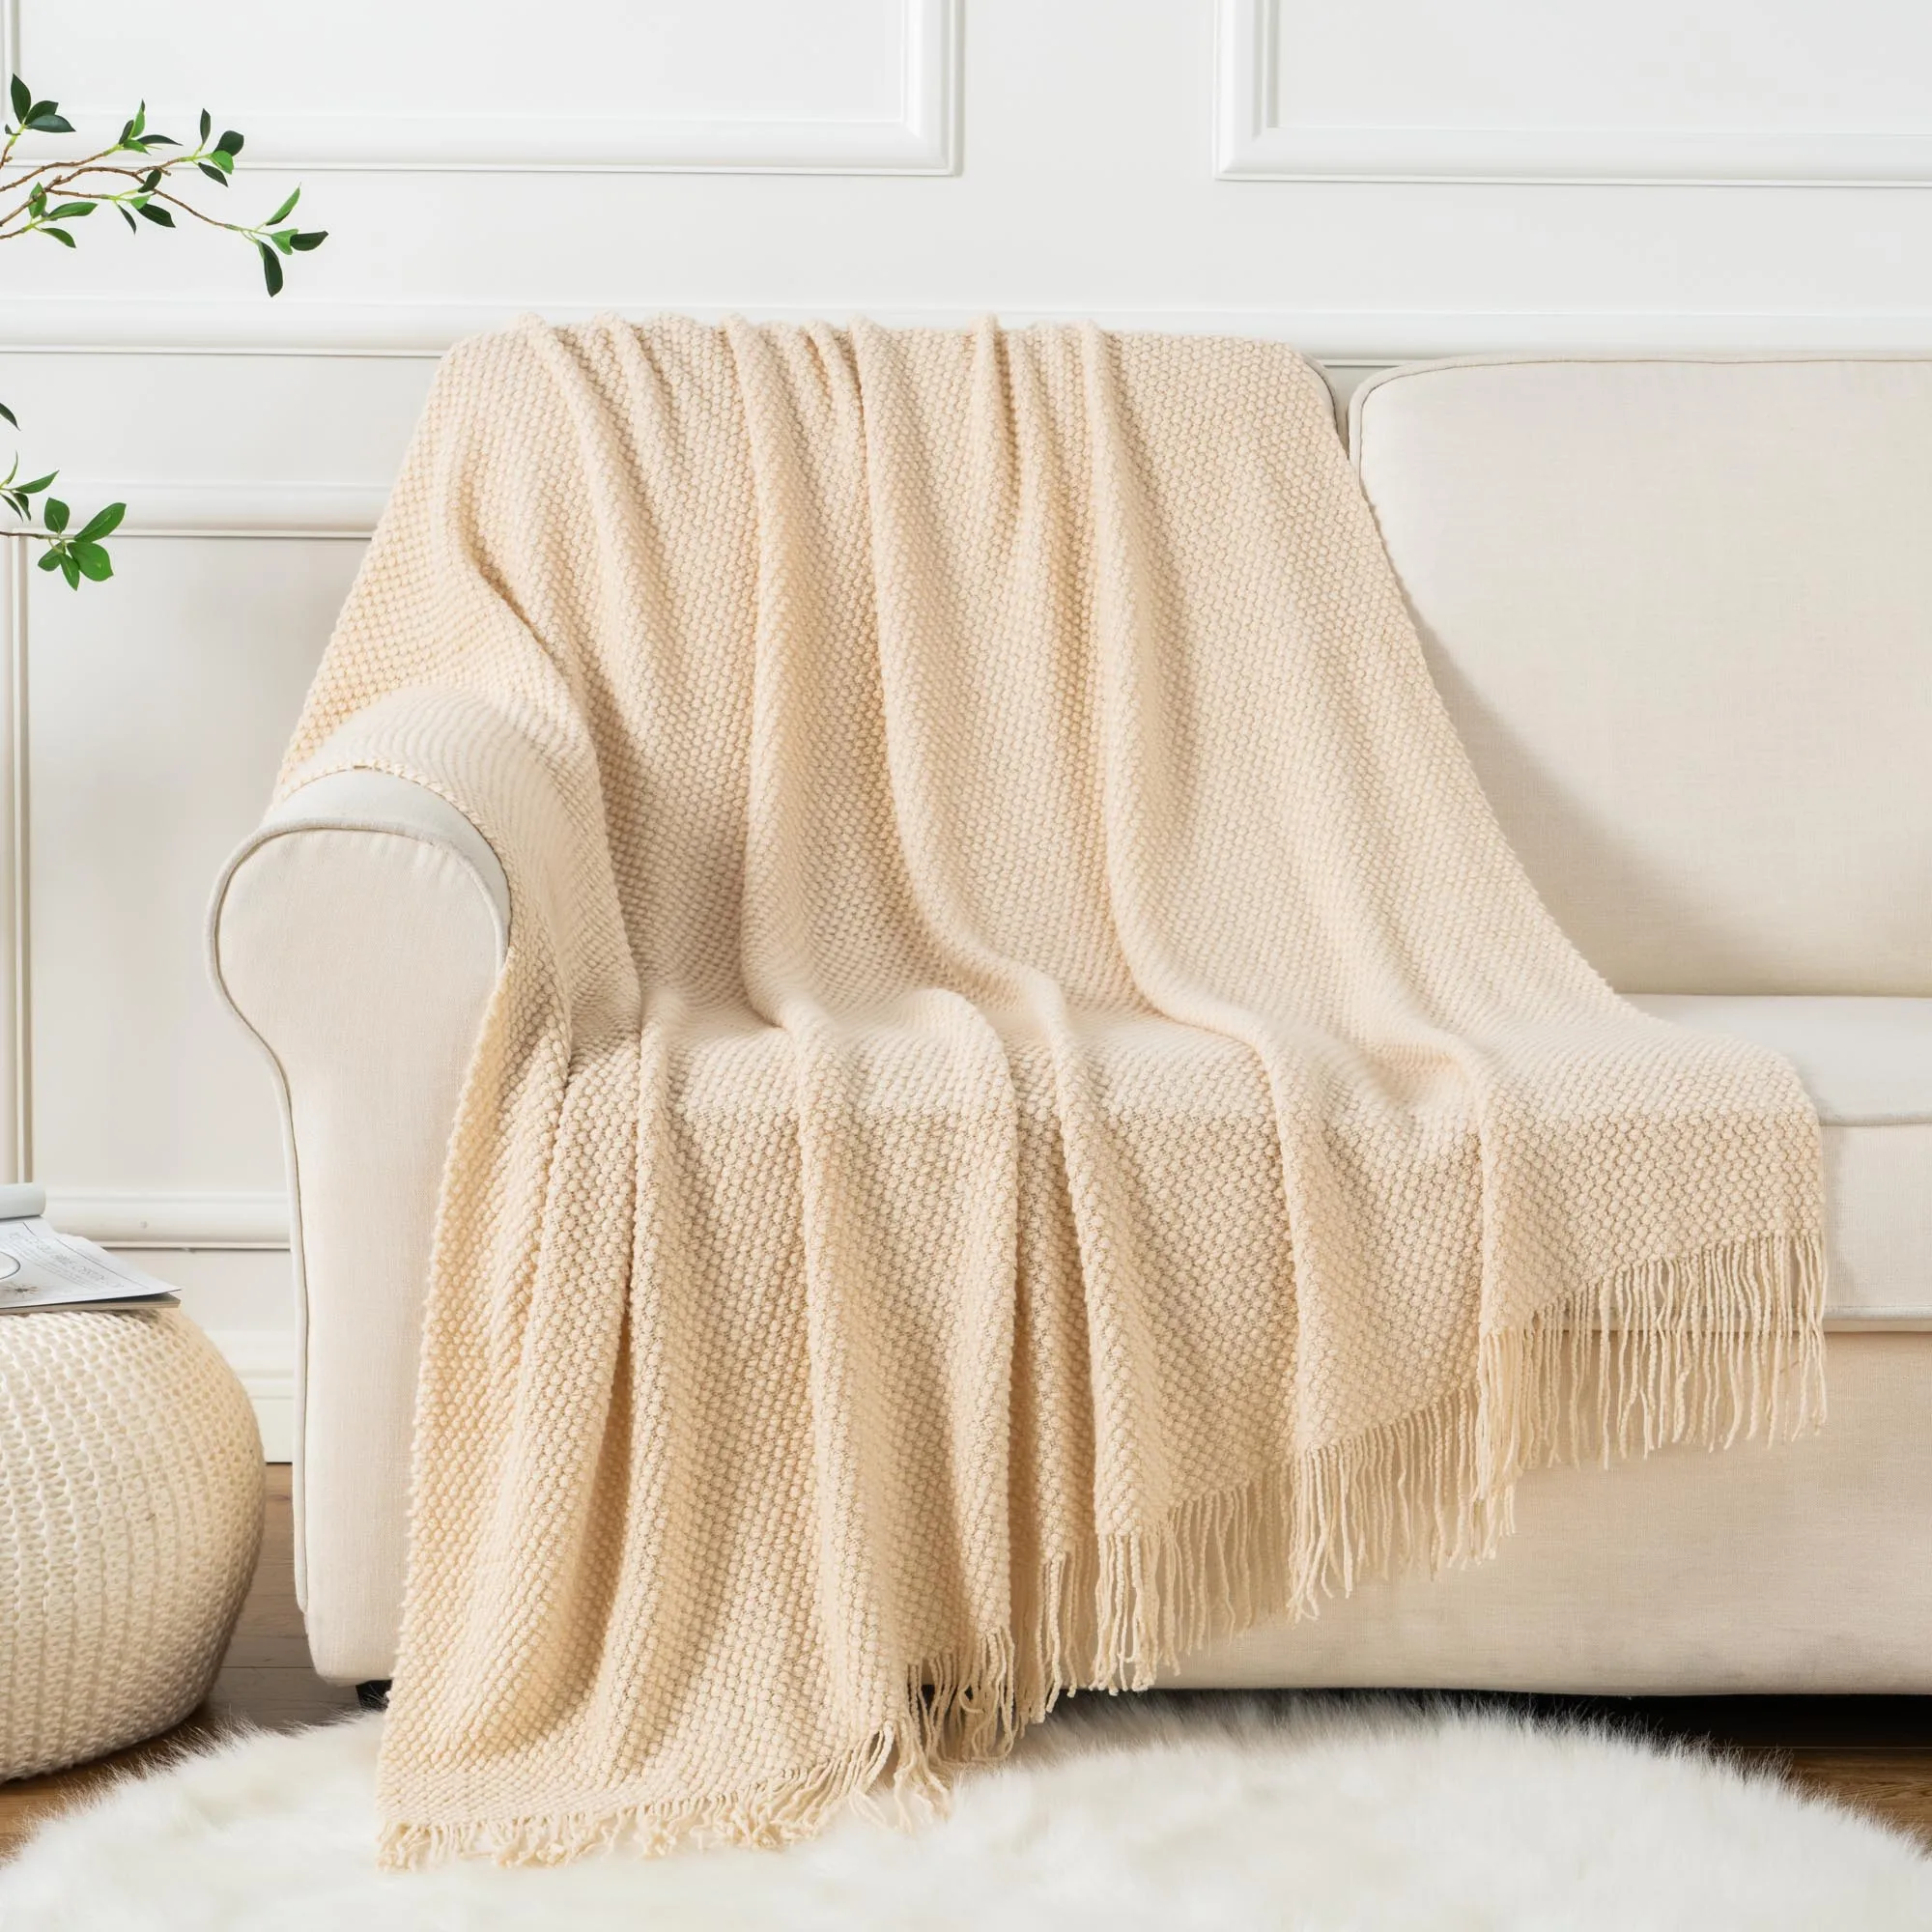 Throws & Blankets, Home